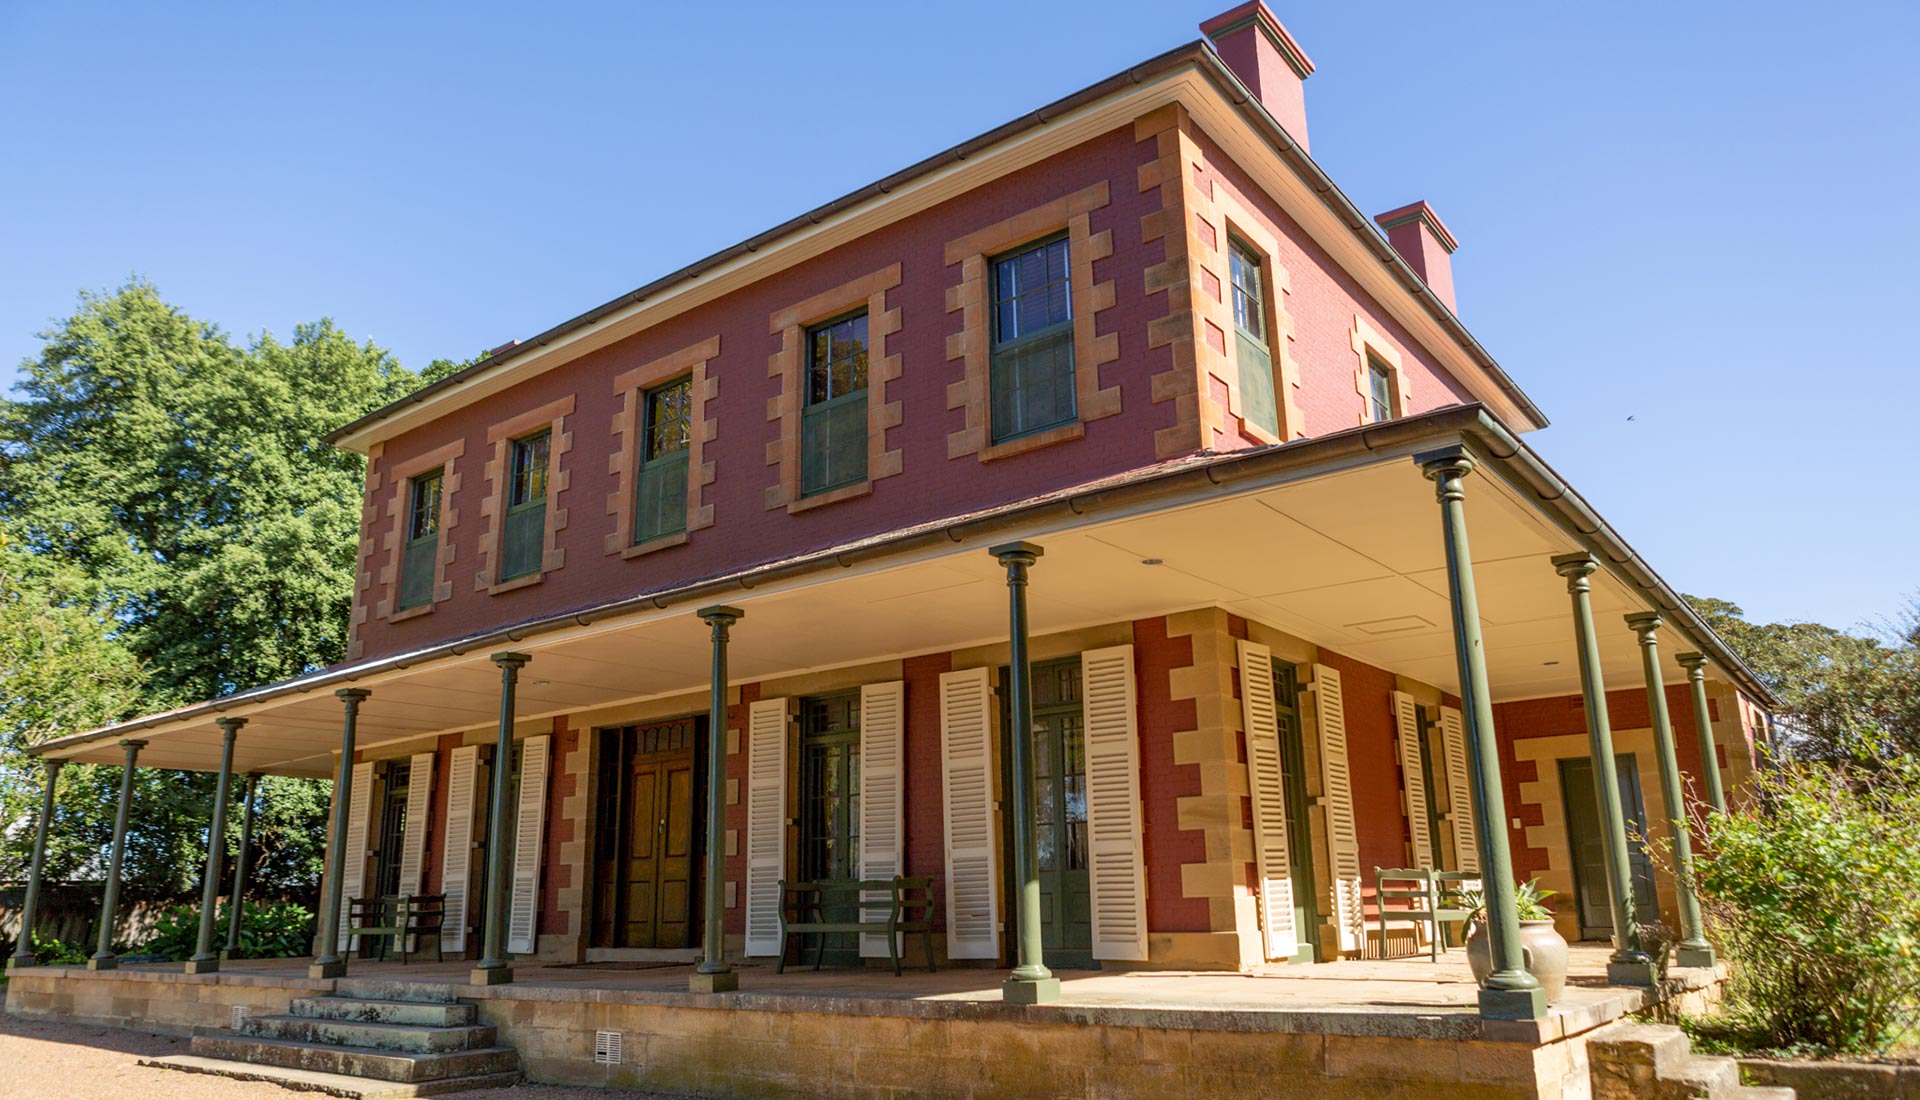 Historical Barrack in Tocal